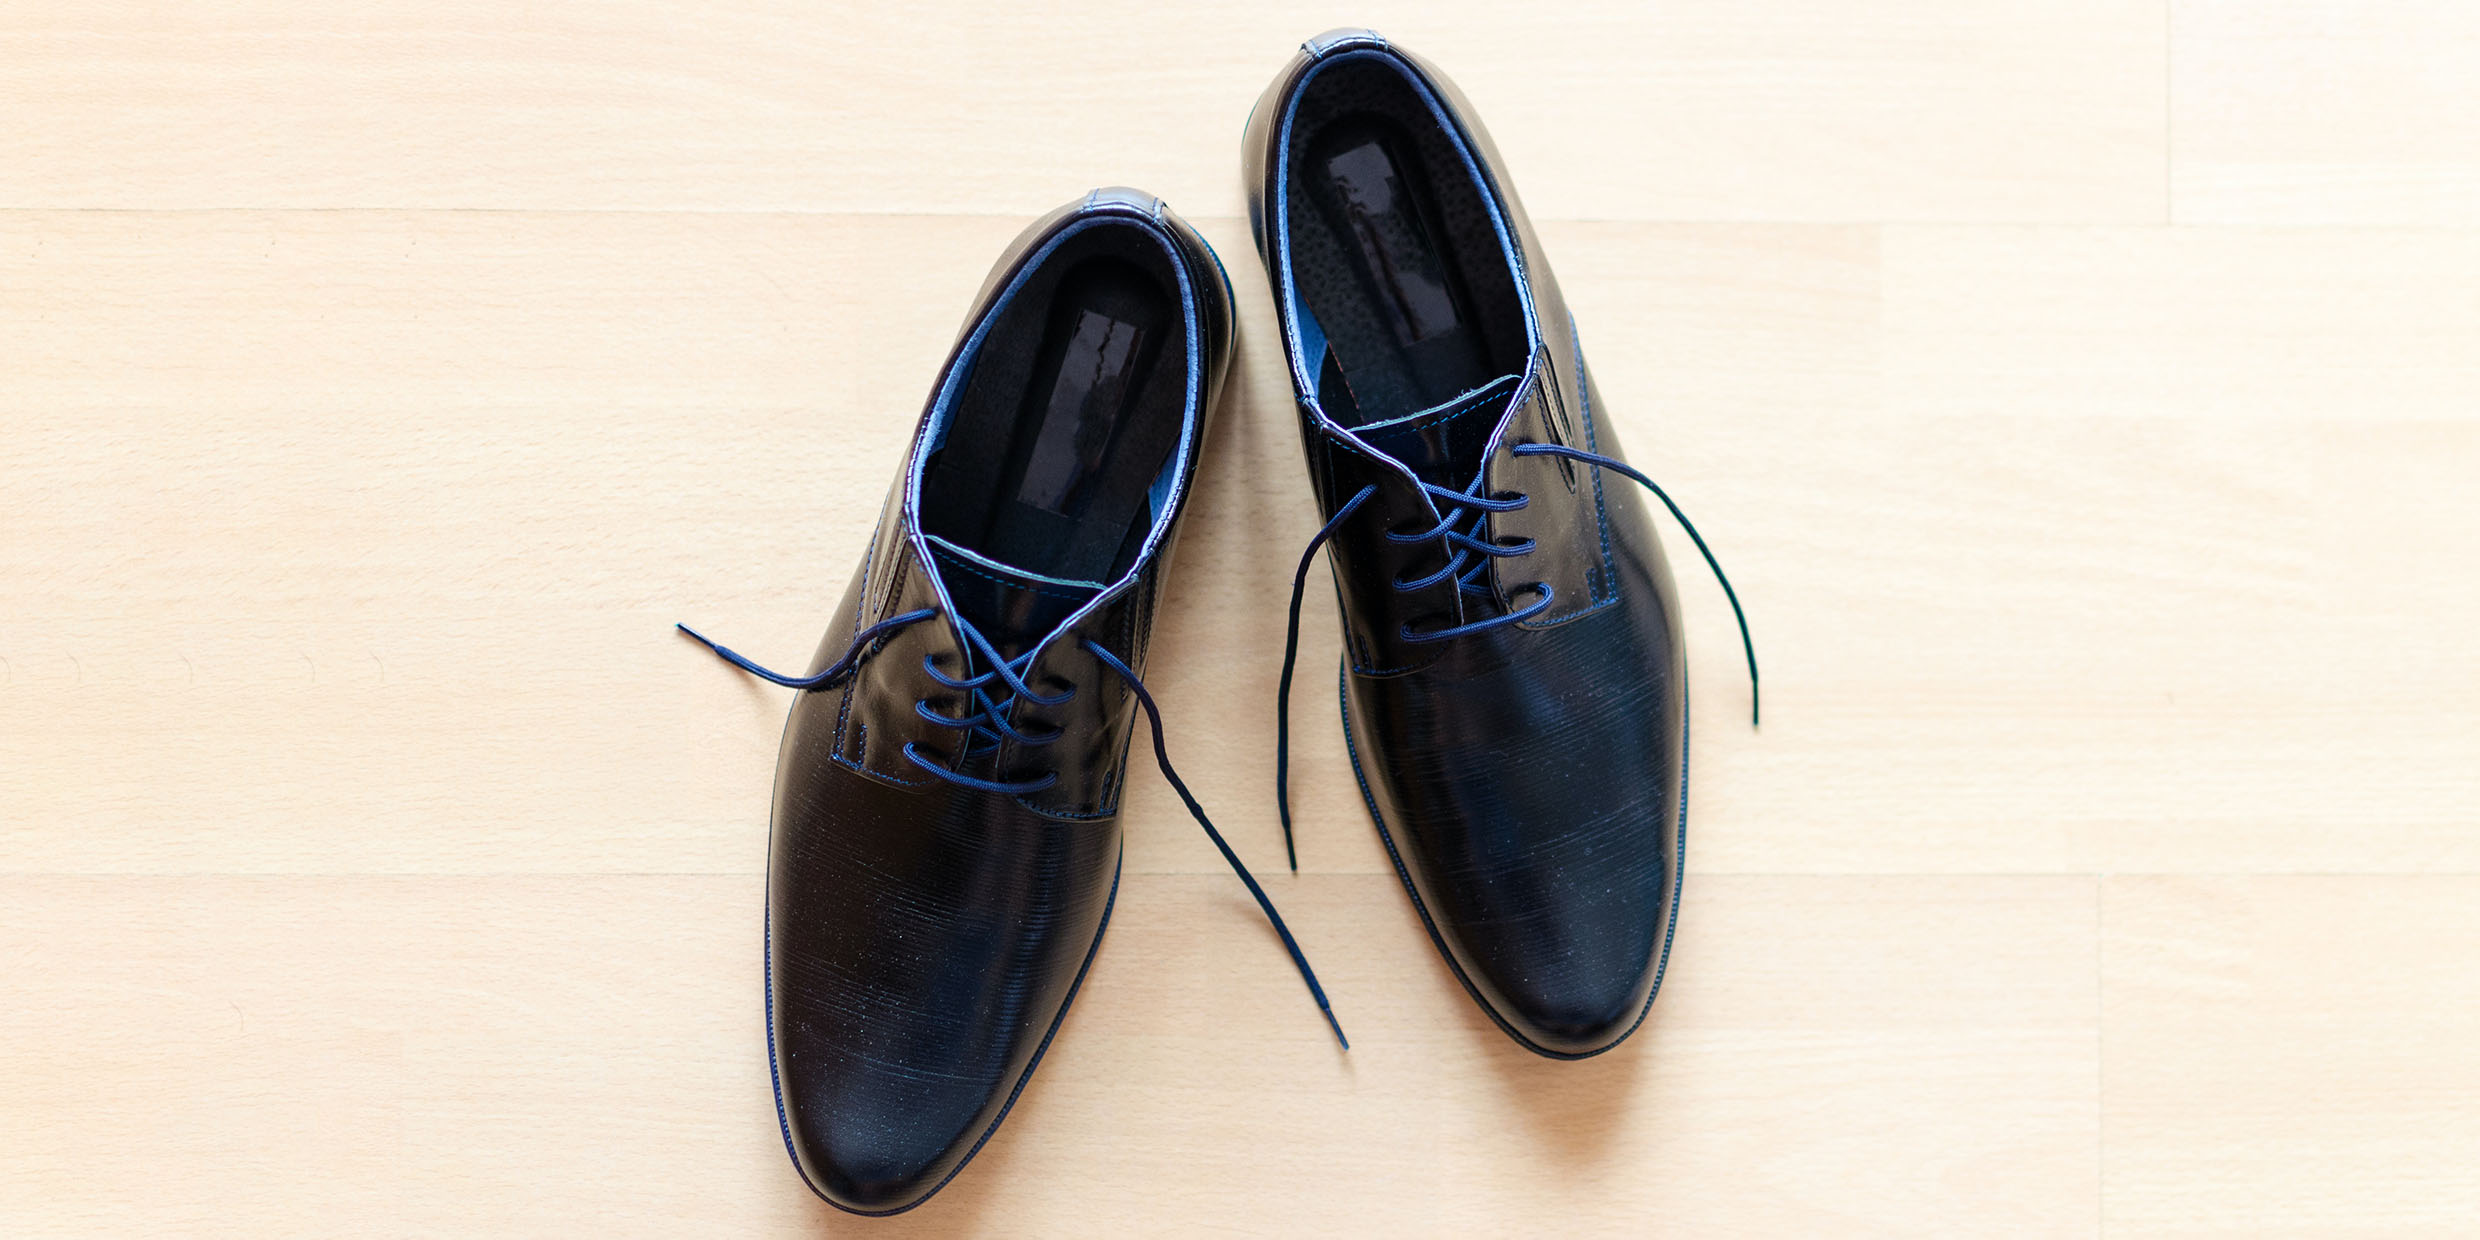 Image of pair of shoes with untied laces